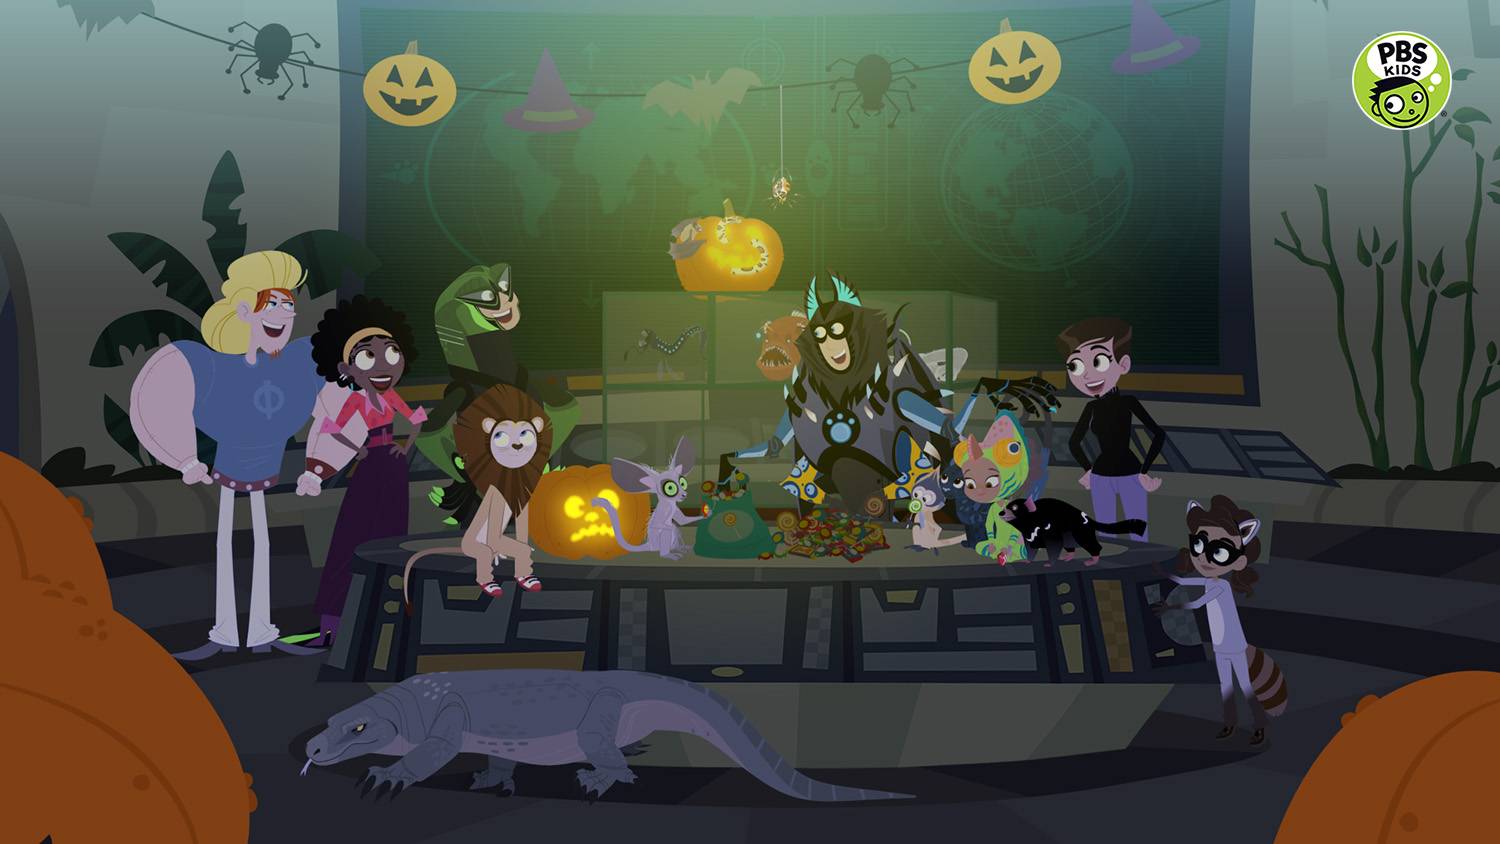 PBS KIDS Kicks Off October With New Halloween Programming, Games, And